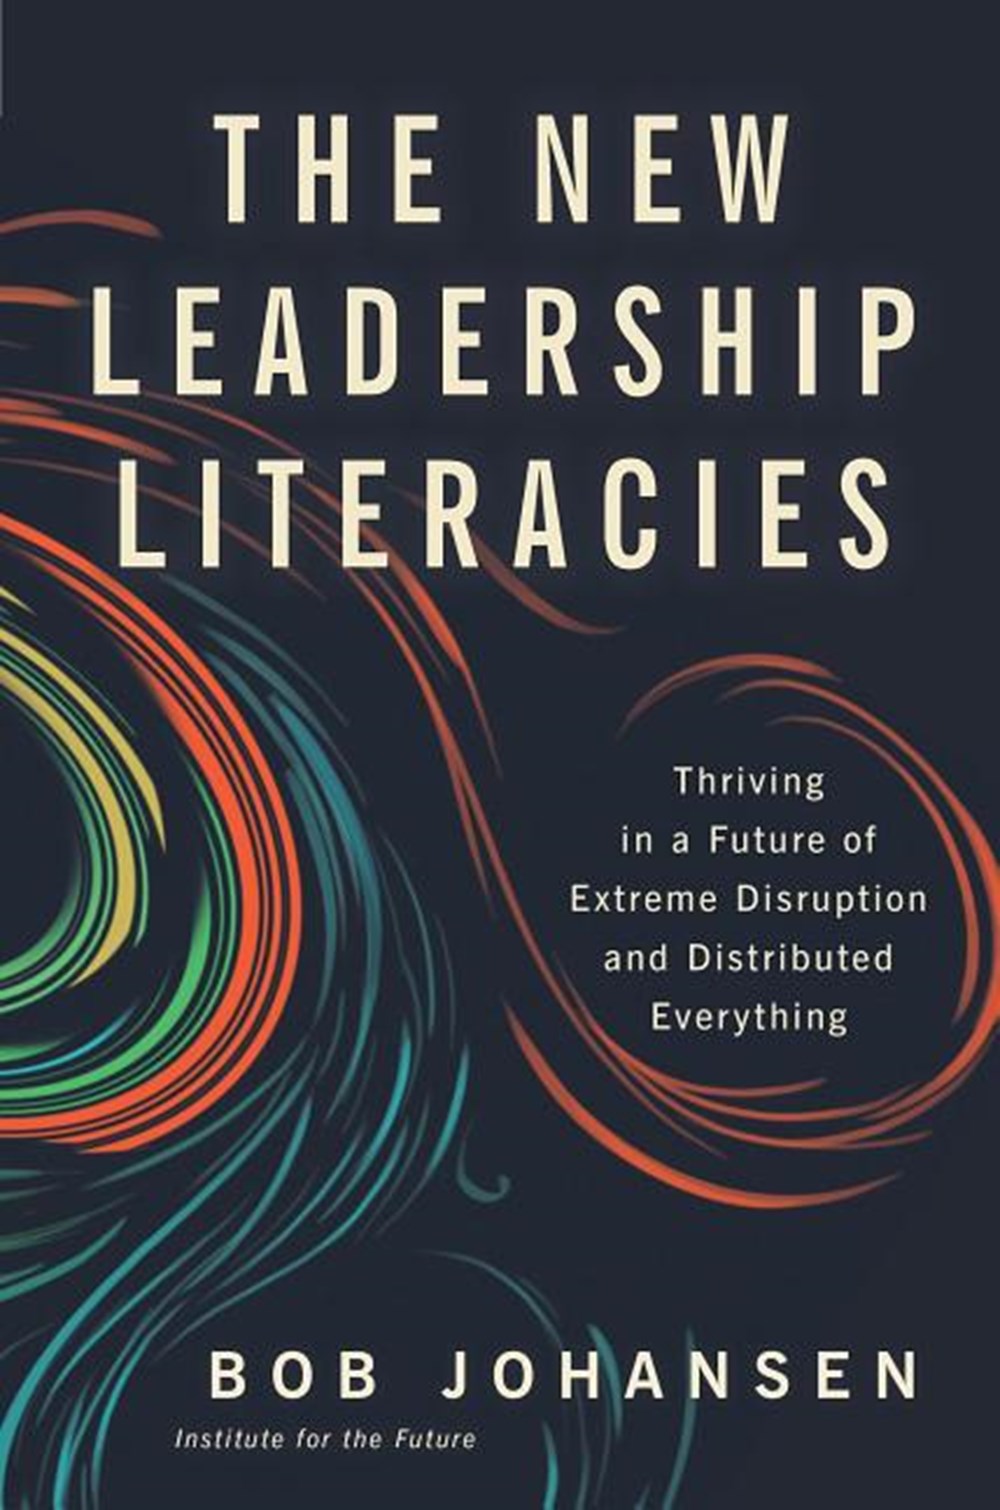 New Leadership Literacies: Thriving in a Future of Extreme Disruption and Distributed Everything